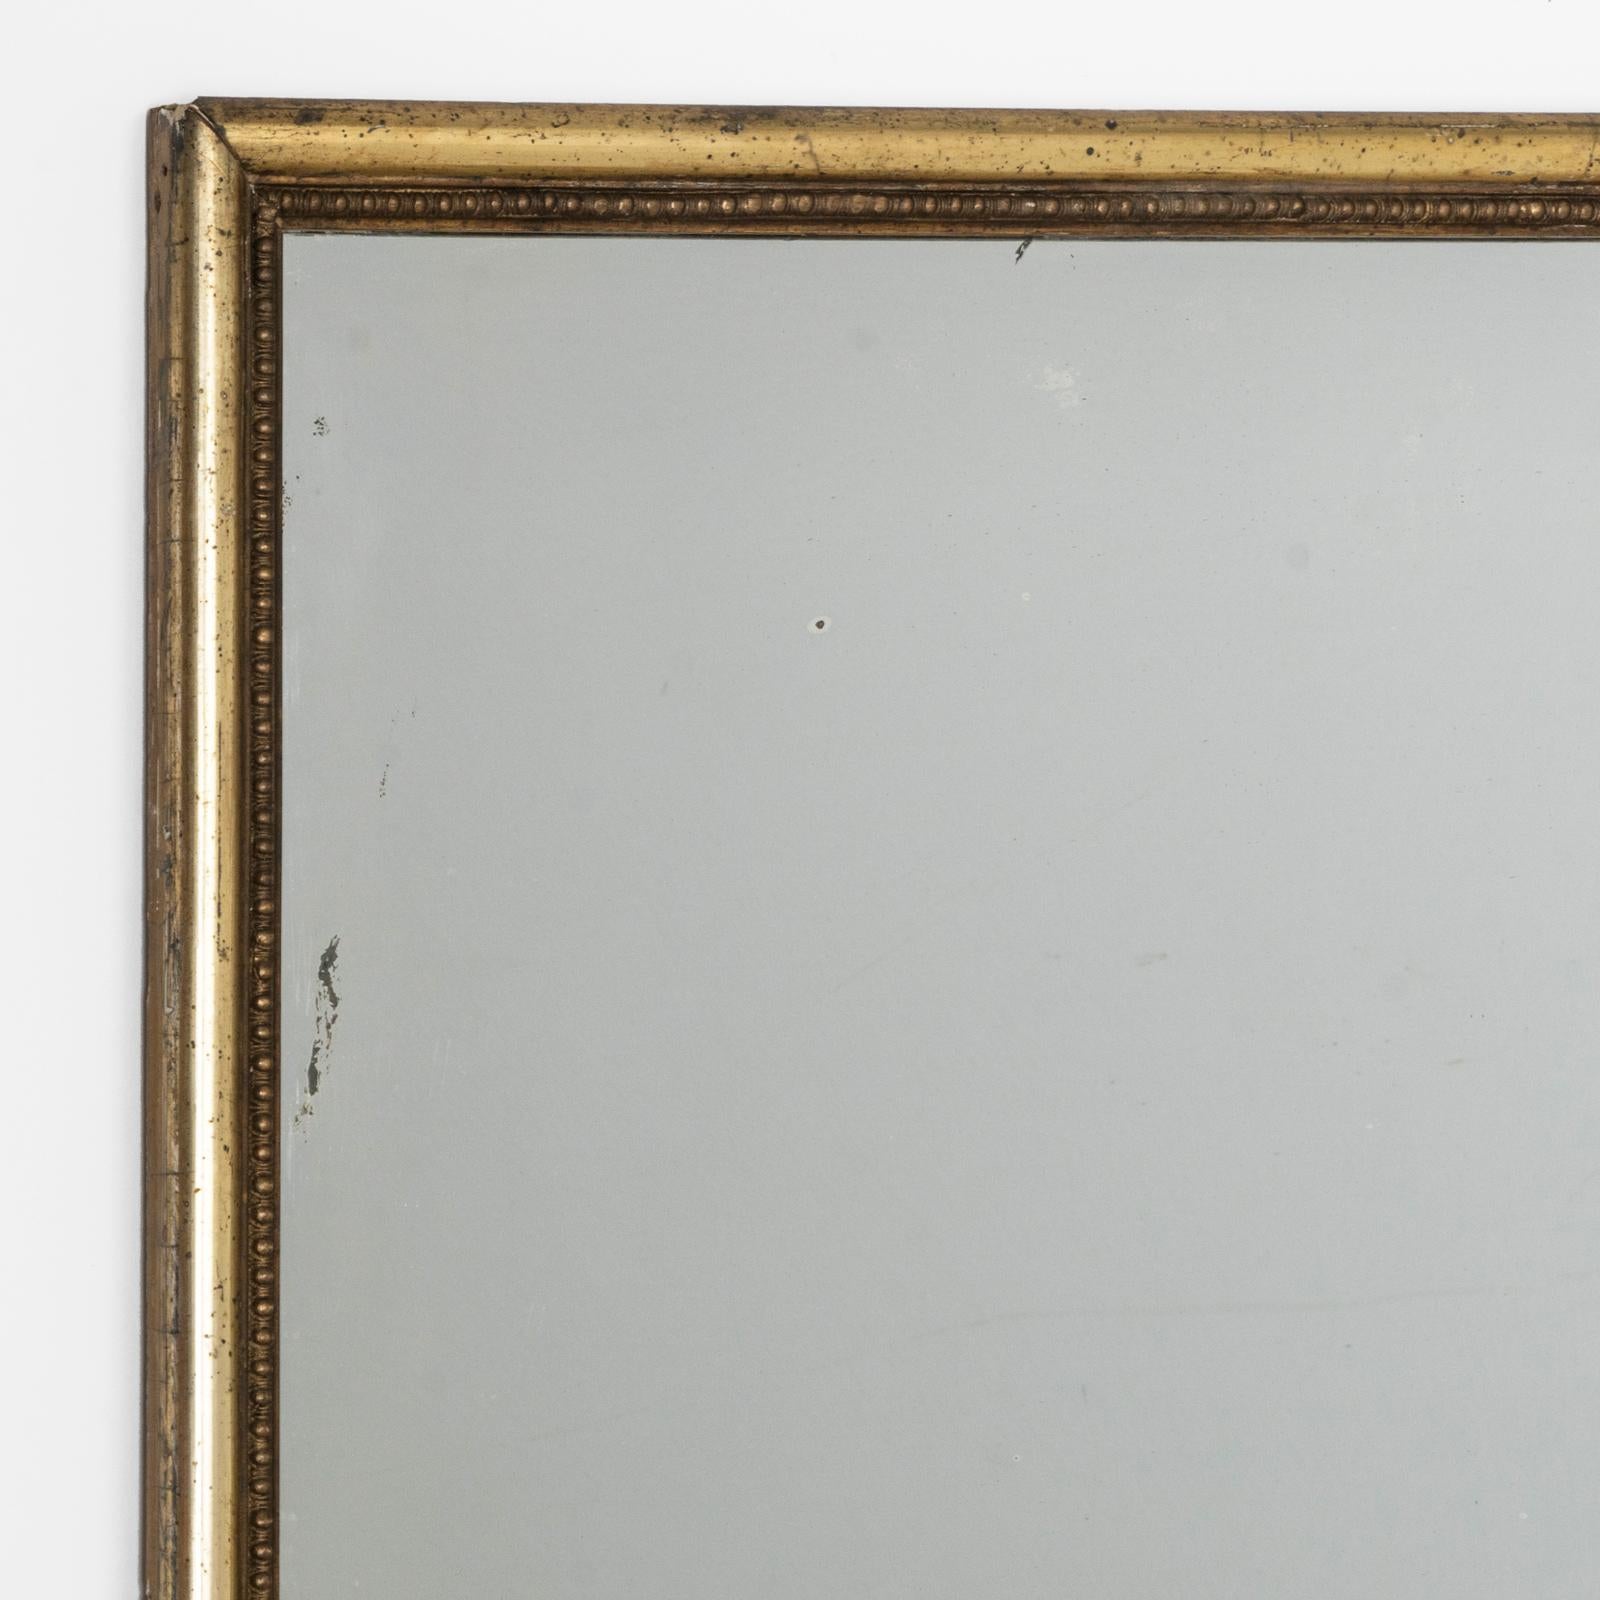 A grand French Turn of the Century Giltwood Rectangular Mirror from around 1900 with a gracefully subtle golden frame.

The mirror glass carries a touch of character in the form of a few charming small spots. These imperfections, rather than